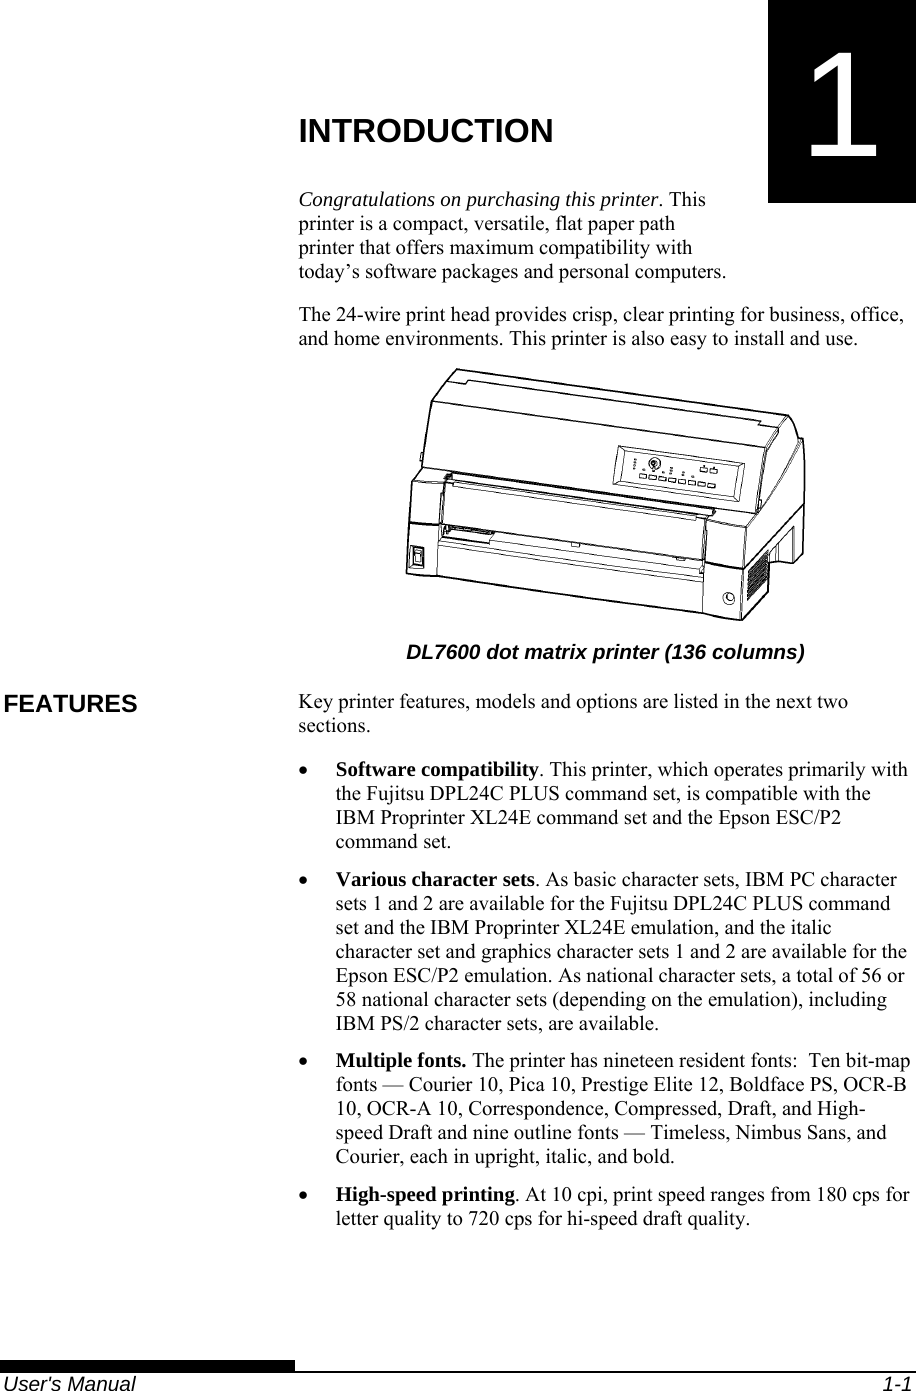   User&apos;s Manual  1-1 1  CHAPTER 1  INTRODUCTION INTRODUCTION Congratulations on purchasing this printer. This printer is a compact, versatile, flat paper path printer that offers maximum compatibility with today’s software packages and personal computers. The 24-wire print head provides crisp, clear printing for business, office, and home environments. This printer is also easy to install and use.  DL7600 dot matrix printer (136 columns) Key printer features, models and options are listed in the next two sections. • Software compatibility. This printer, which operates primarily with the Fujitsu DPL24C PLUS command set, is compatible with the IBM Proprinter XL24E command set and the Epson ESC/P2 command set. • Various character sets. As basic character sets, IBM PC character sets 1 and 2 are available for the Fujitsu DPL24C PLUS command set and the IBM Proprinter XL24E emulation, and the italic character set and graphics character sets 1 and 2 are available for the Epson ESC/P2 emulation. As national character sets, a total of 56 or 58 national character sets (depending on the emulation), including IBM PS/2 character sets, are available. • Multiple fonts. The printer has nineteen resident fonts:  Ten bit-map fonts — Courier 10, Pica 10, Prestige Elite 12, Boldface PS, OCR-B 10, OCR-A 10, Correspondence, Compressed, Draft, and High-speed Draft and nine outline fonts — Timeless, Nimbus Sans, and Courier, each in upright, italic, and bold. • High-speed printing. At 10 cpi, print speed ranges from 180 cps for letter quality to 720 cps for hi-speed draft quality. FEATURES 